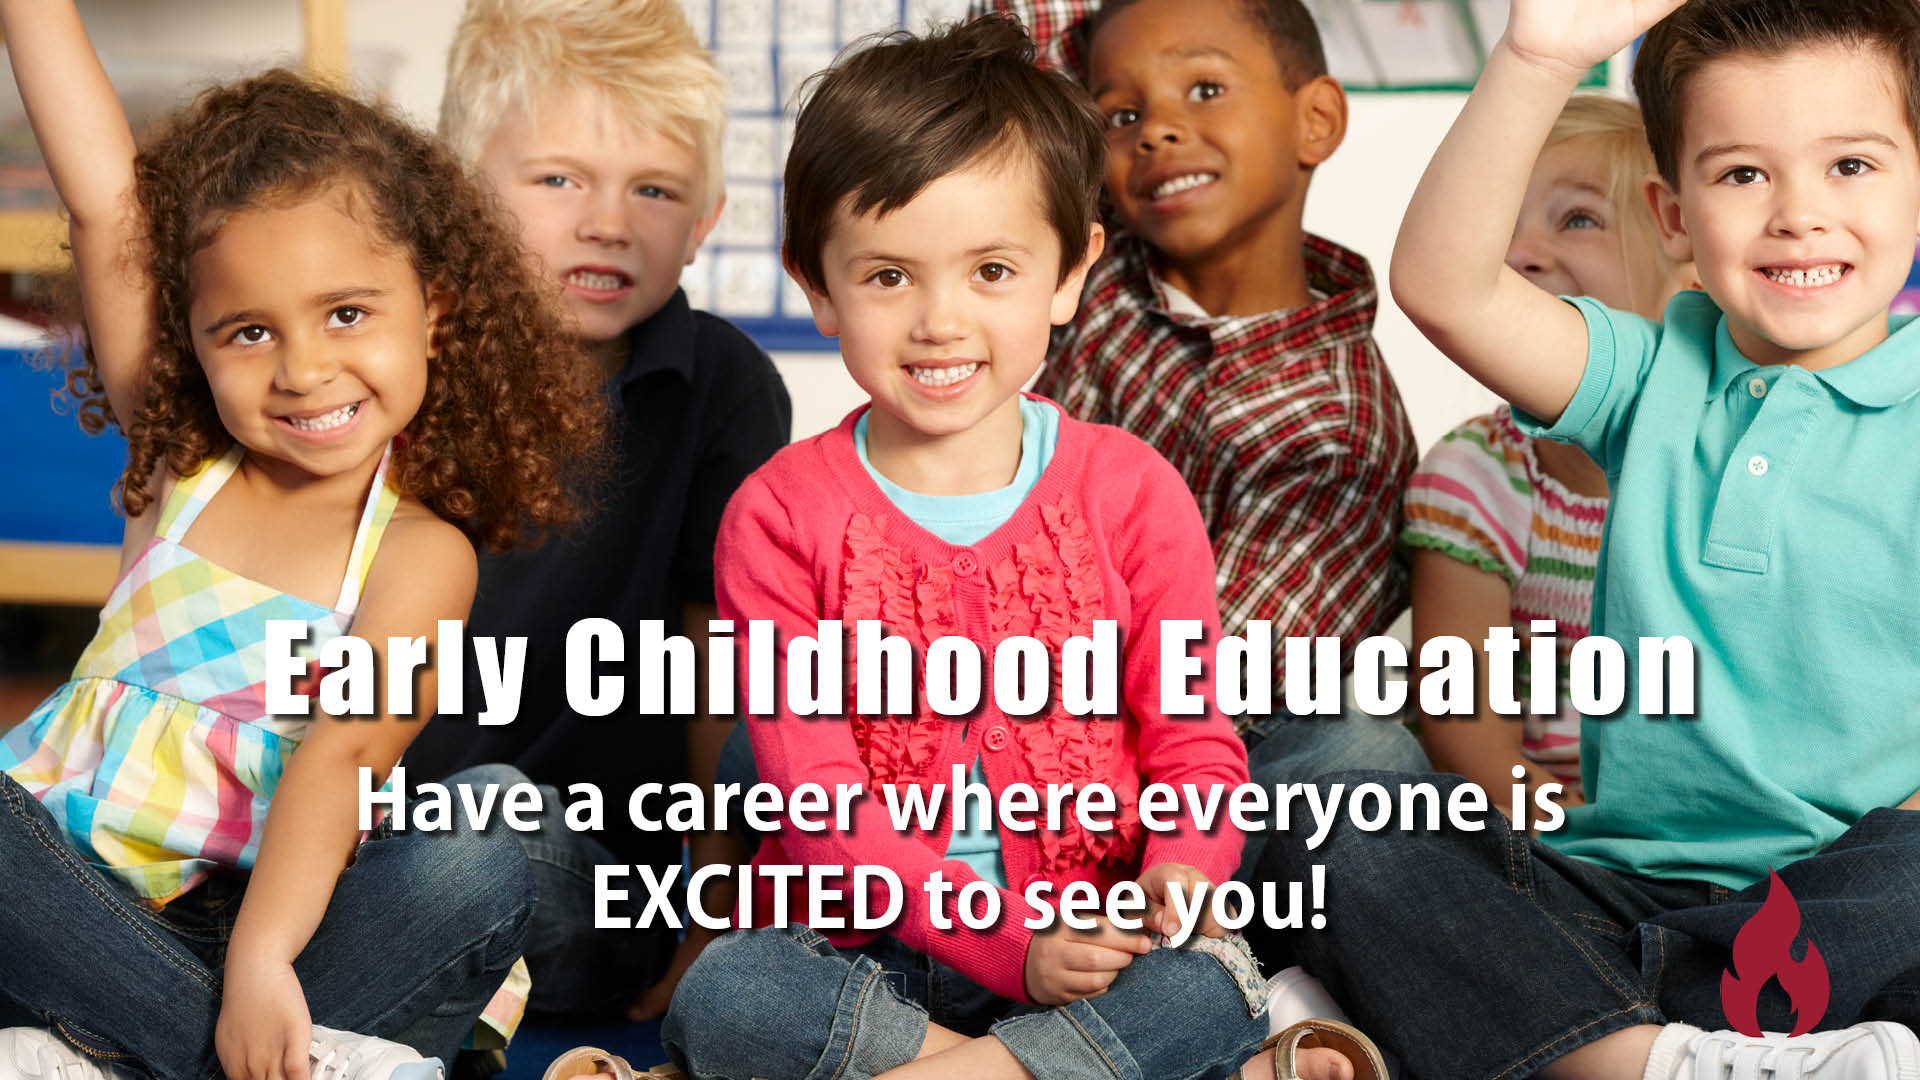 Make a secure career move to Early Childhood Education